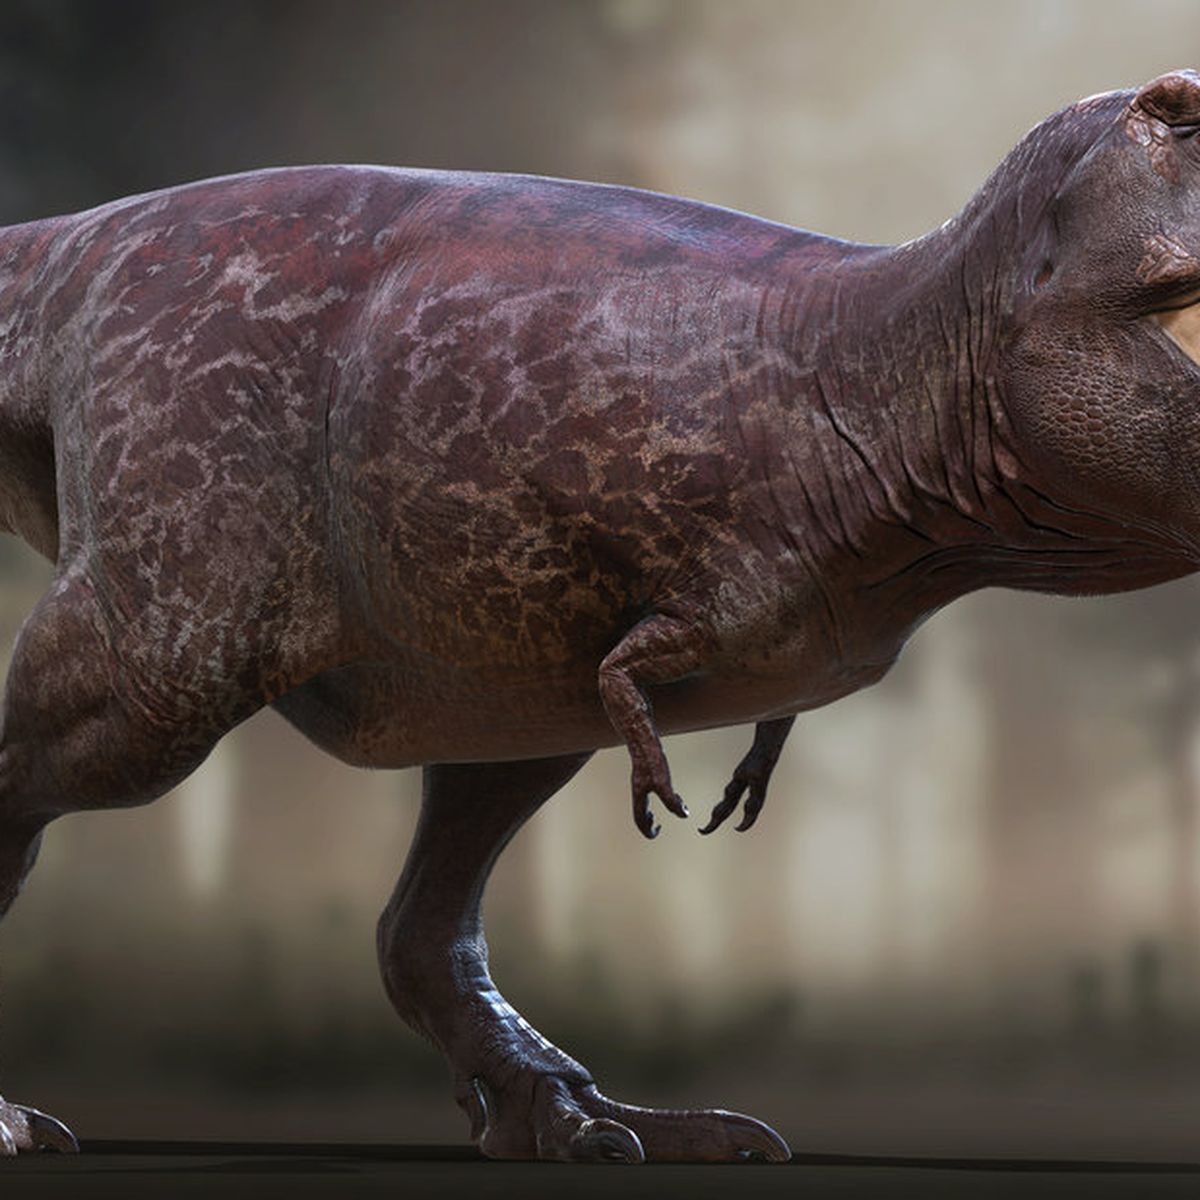 T. rex could have been 70% bigger than fossils suggest, new study shows